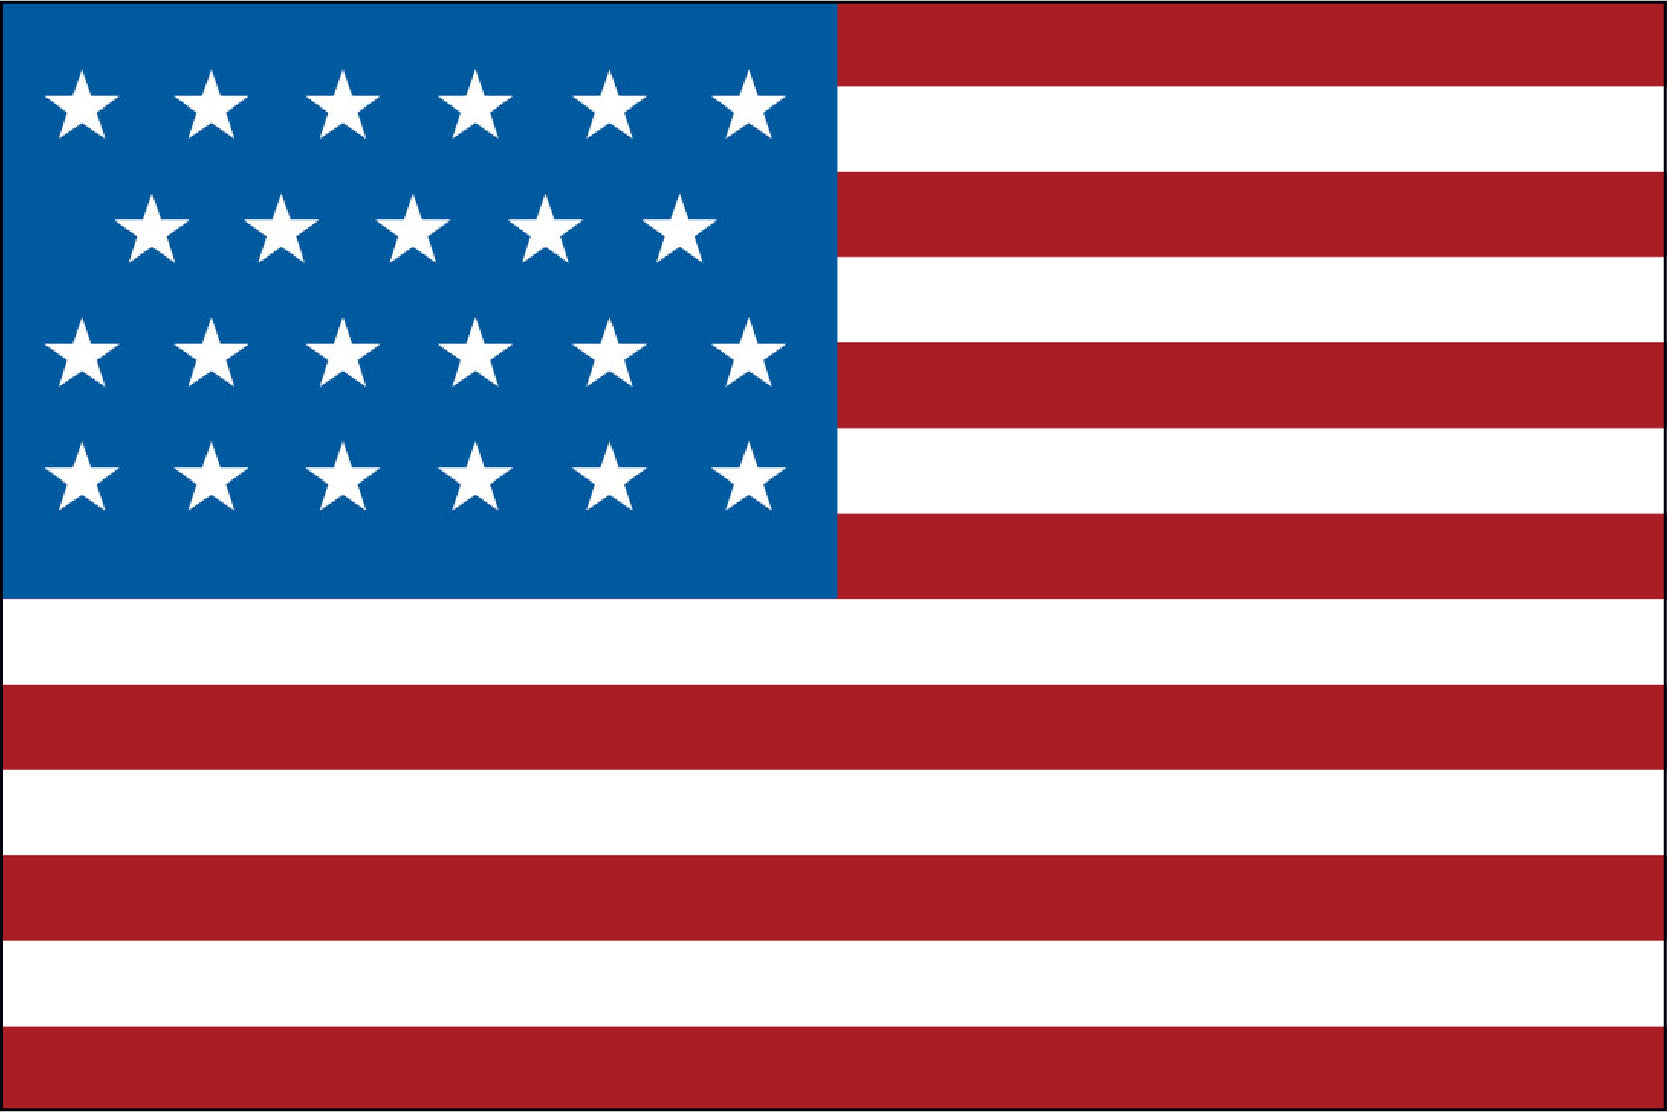 23 Star Old Glory Flag - LEAD TIMES ARE CURRENTLY RUNNING 6-8 WEEKS